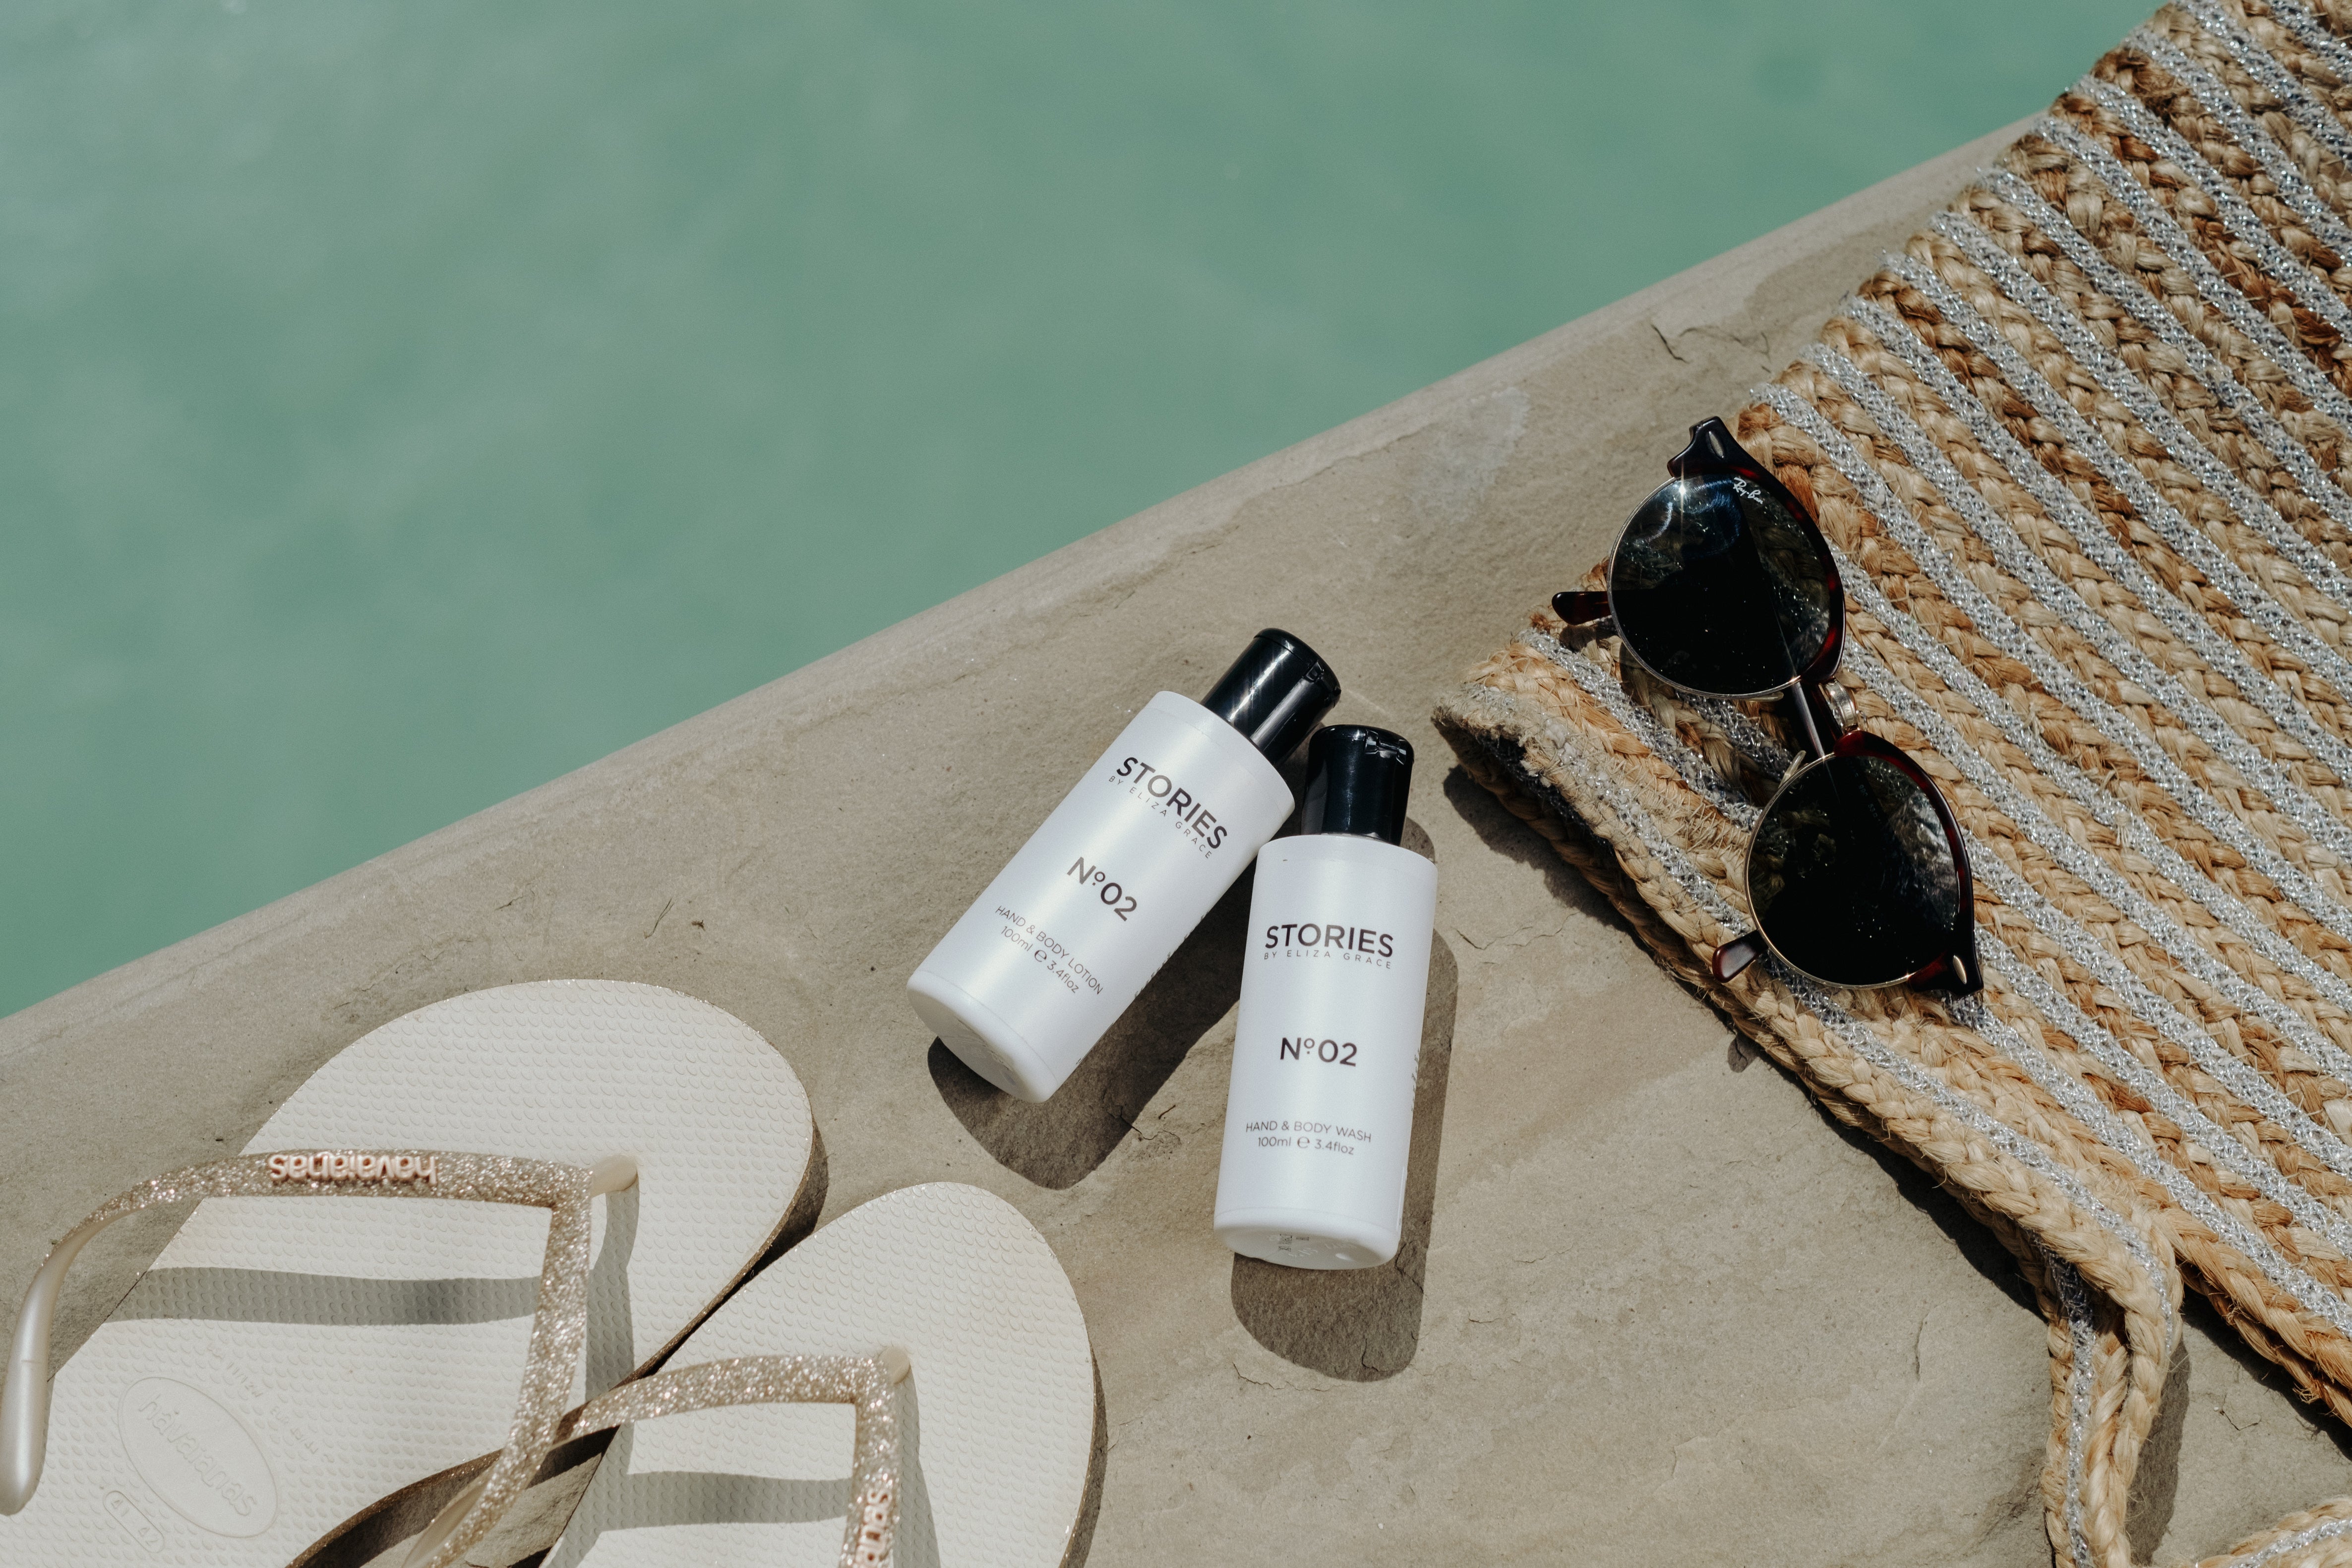 STORIES Parfum Hand and Body Travel Duo by the pool with flipflops and sunglasses. 